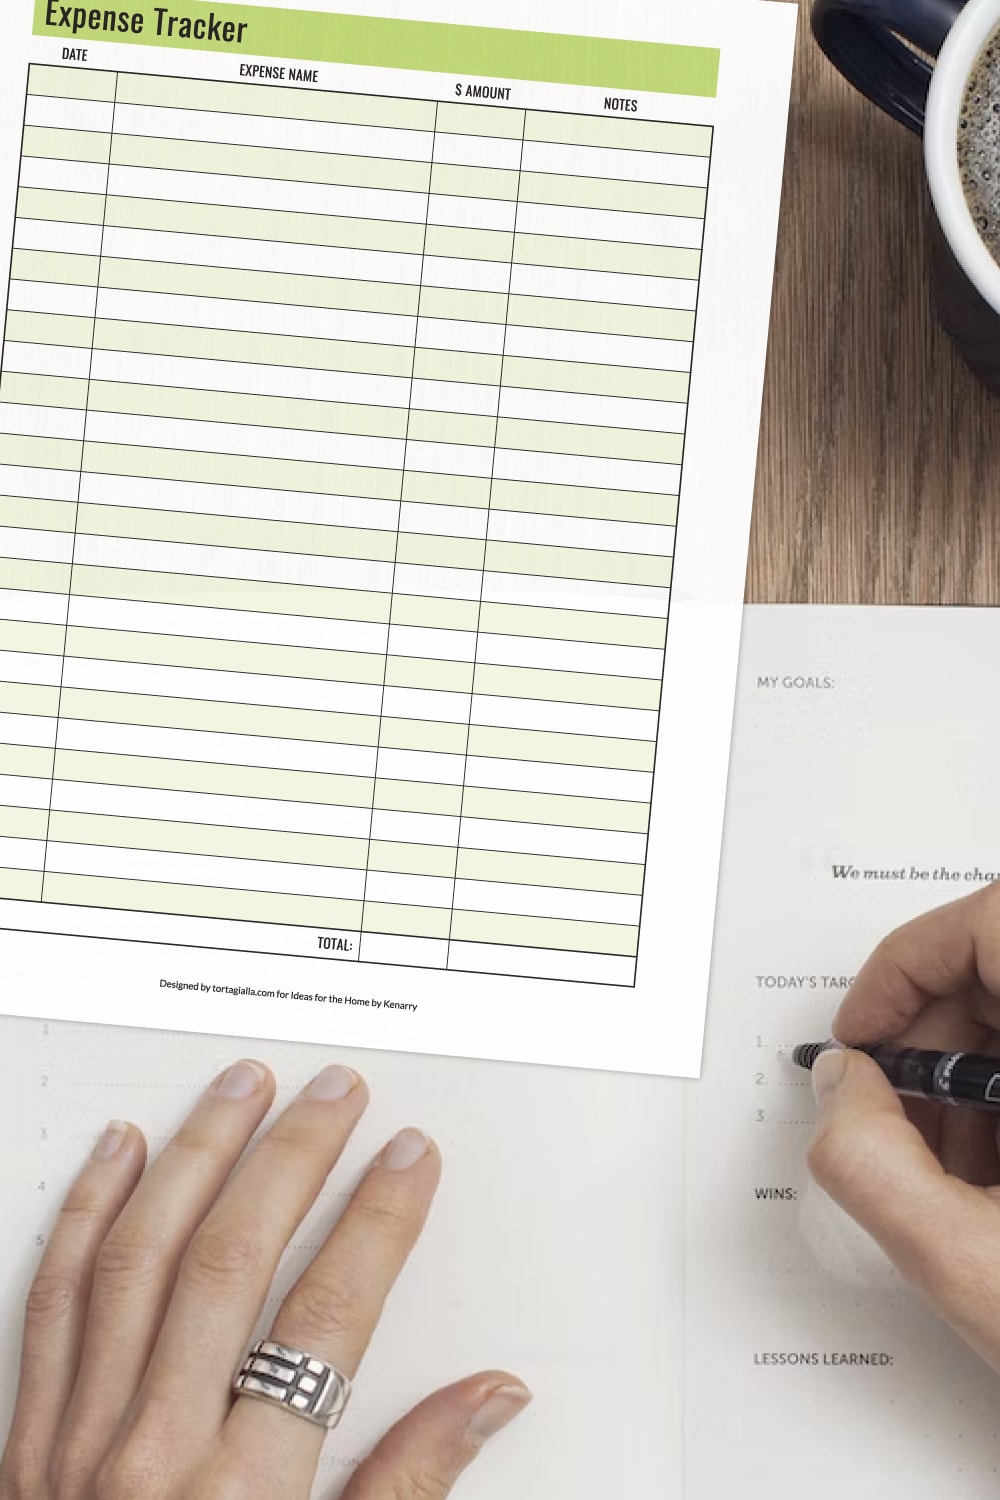 Preview of expense tracker printable on a wooden desk background with partial view of coffee mug in upper right hand corner with hands filling out a planner notebook underneath. 